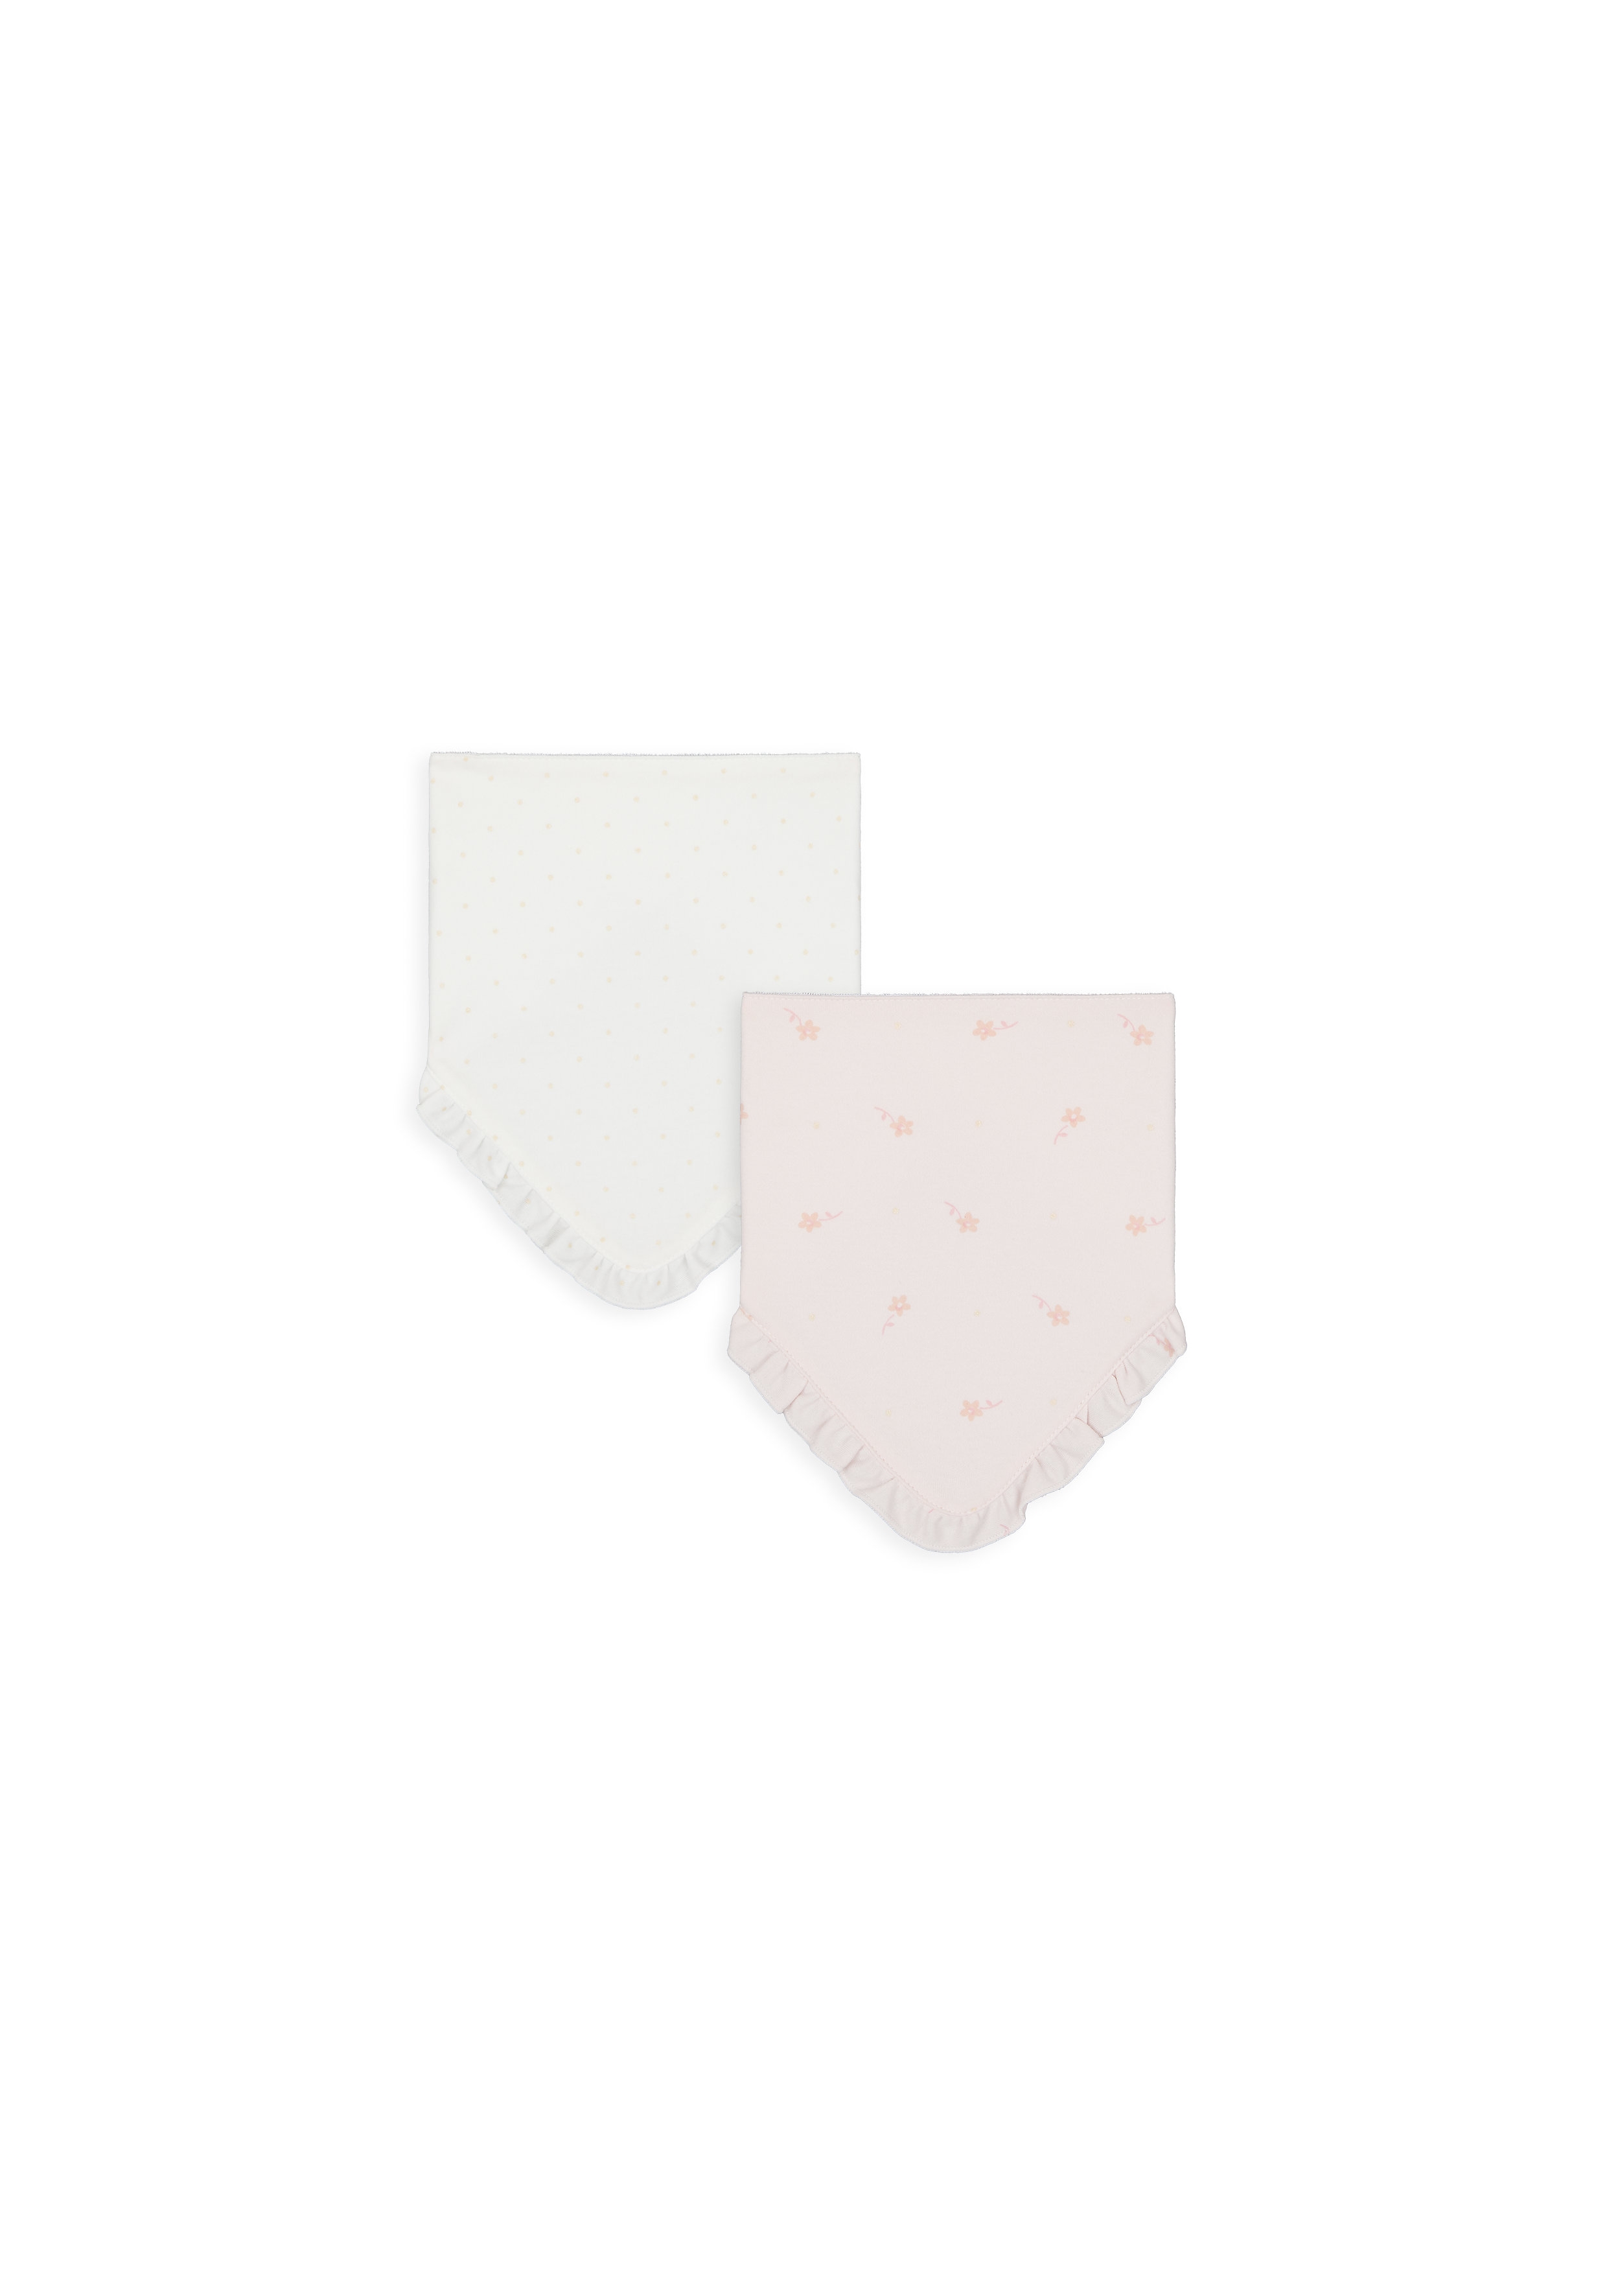 Mothercare | Mothercare Pretty Floral Dribbler Bibs Pink Pack of 2 